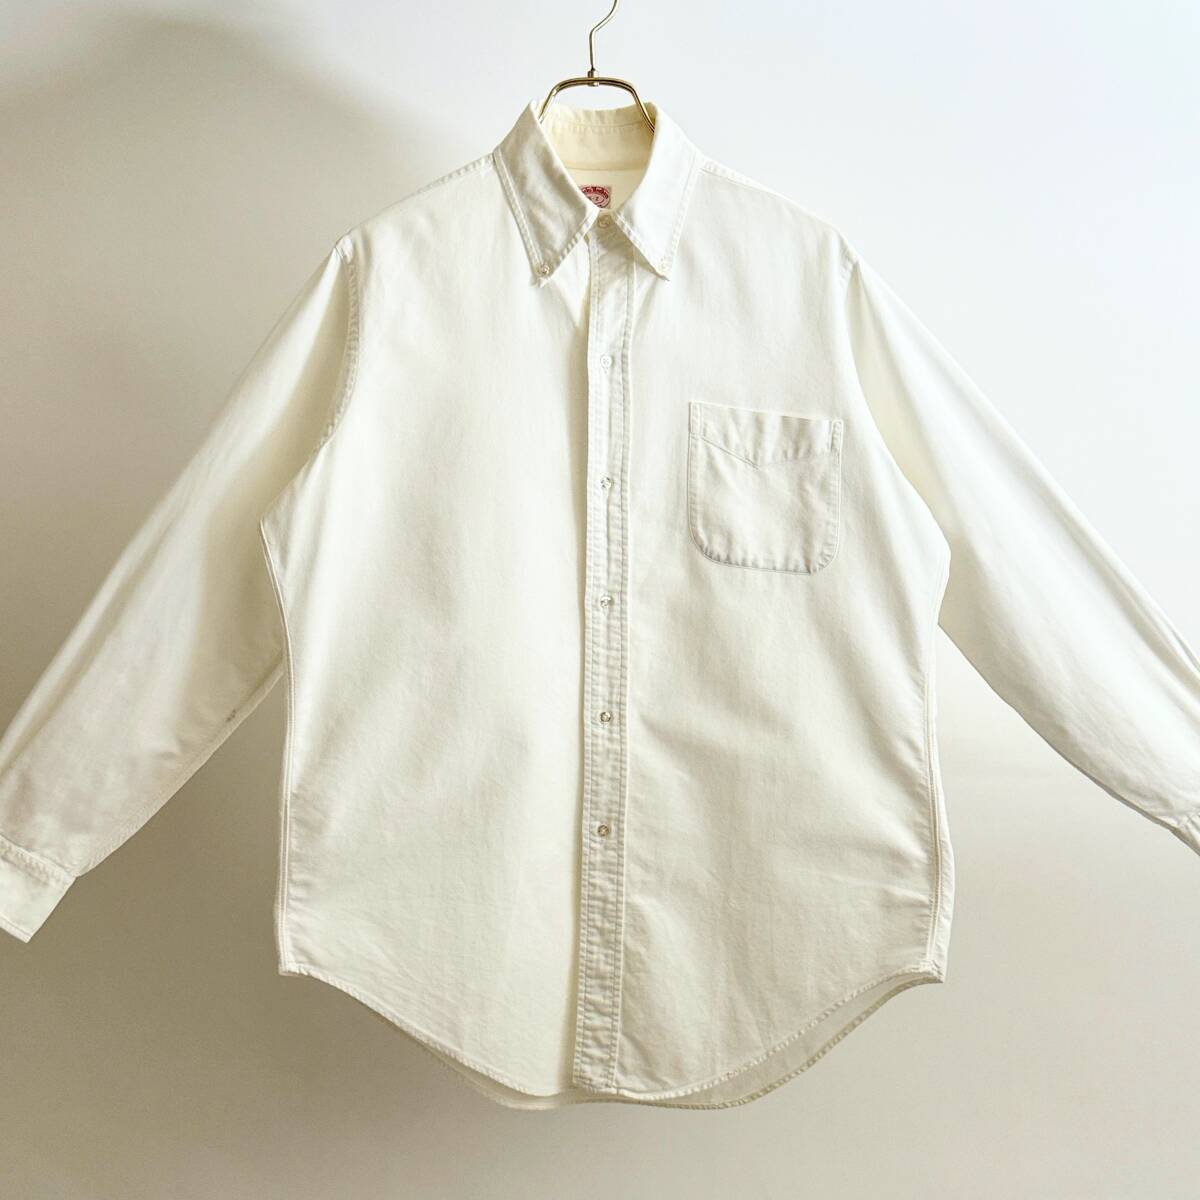  rare { White OX / 6 Button / 15-2 }60s 70s[ Brooks Brothers 6 button white OX oxford BD shirt Vintage ]